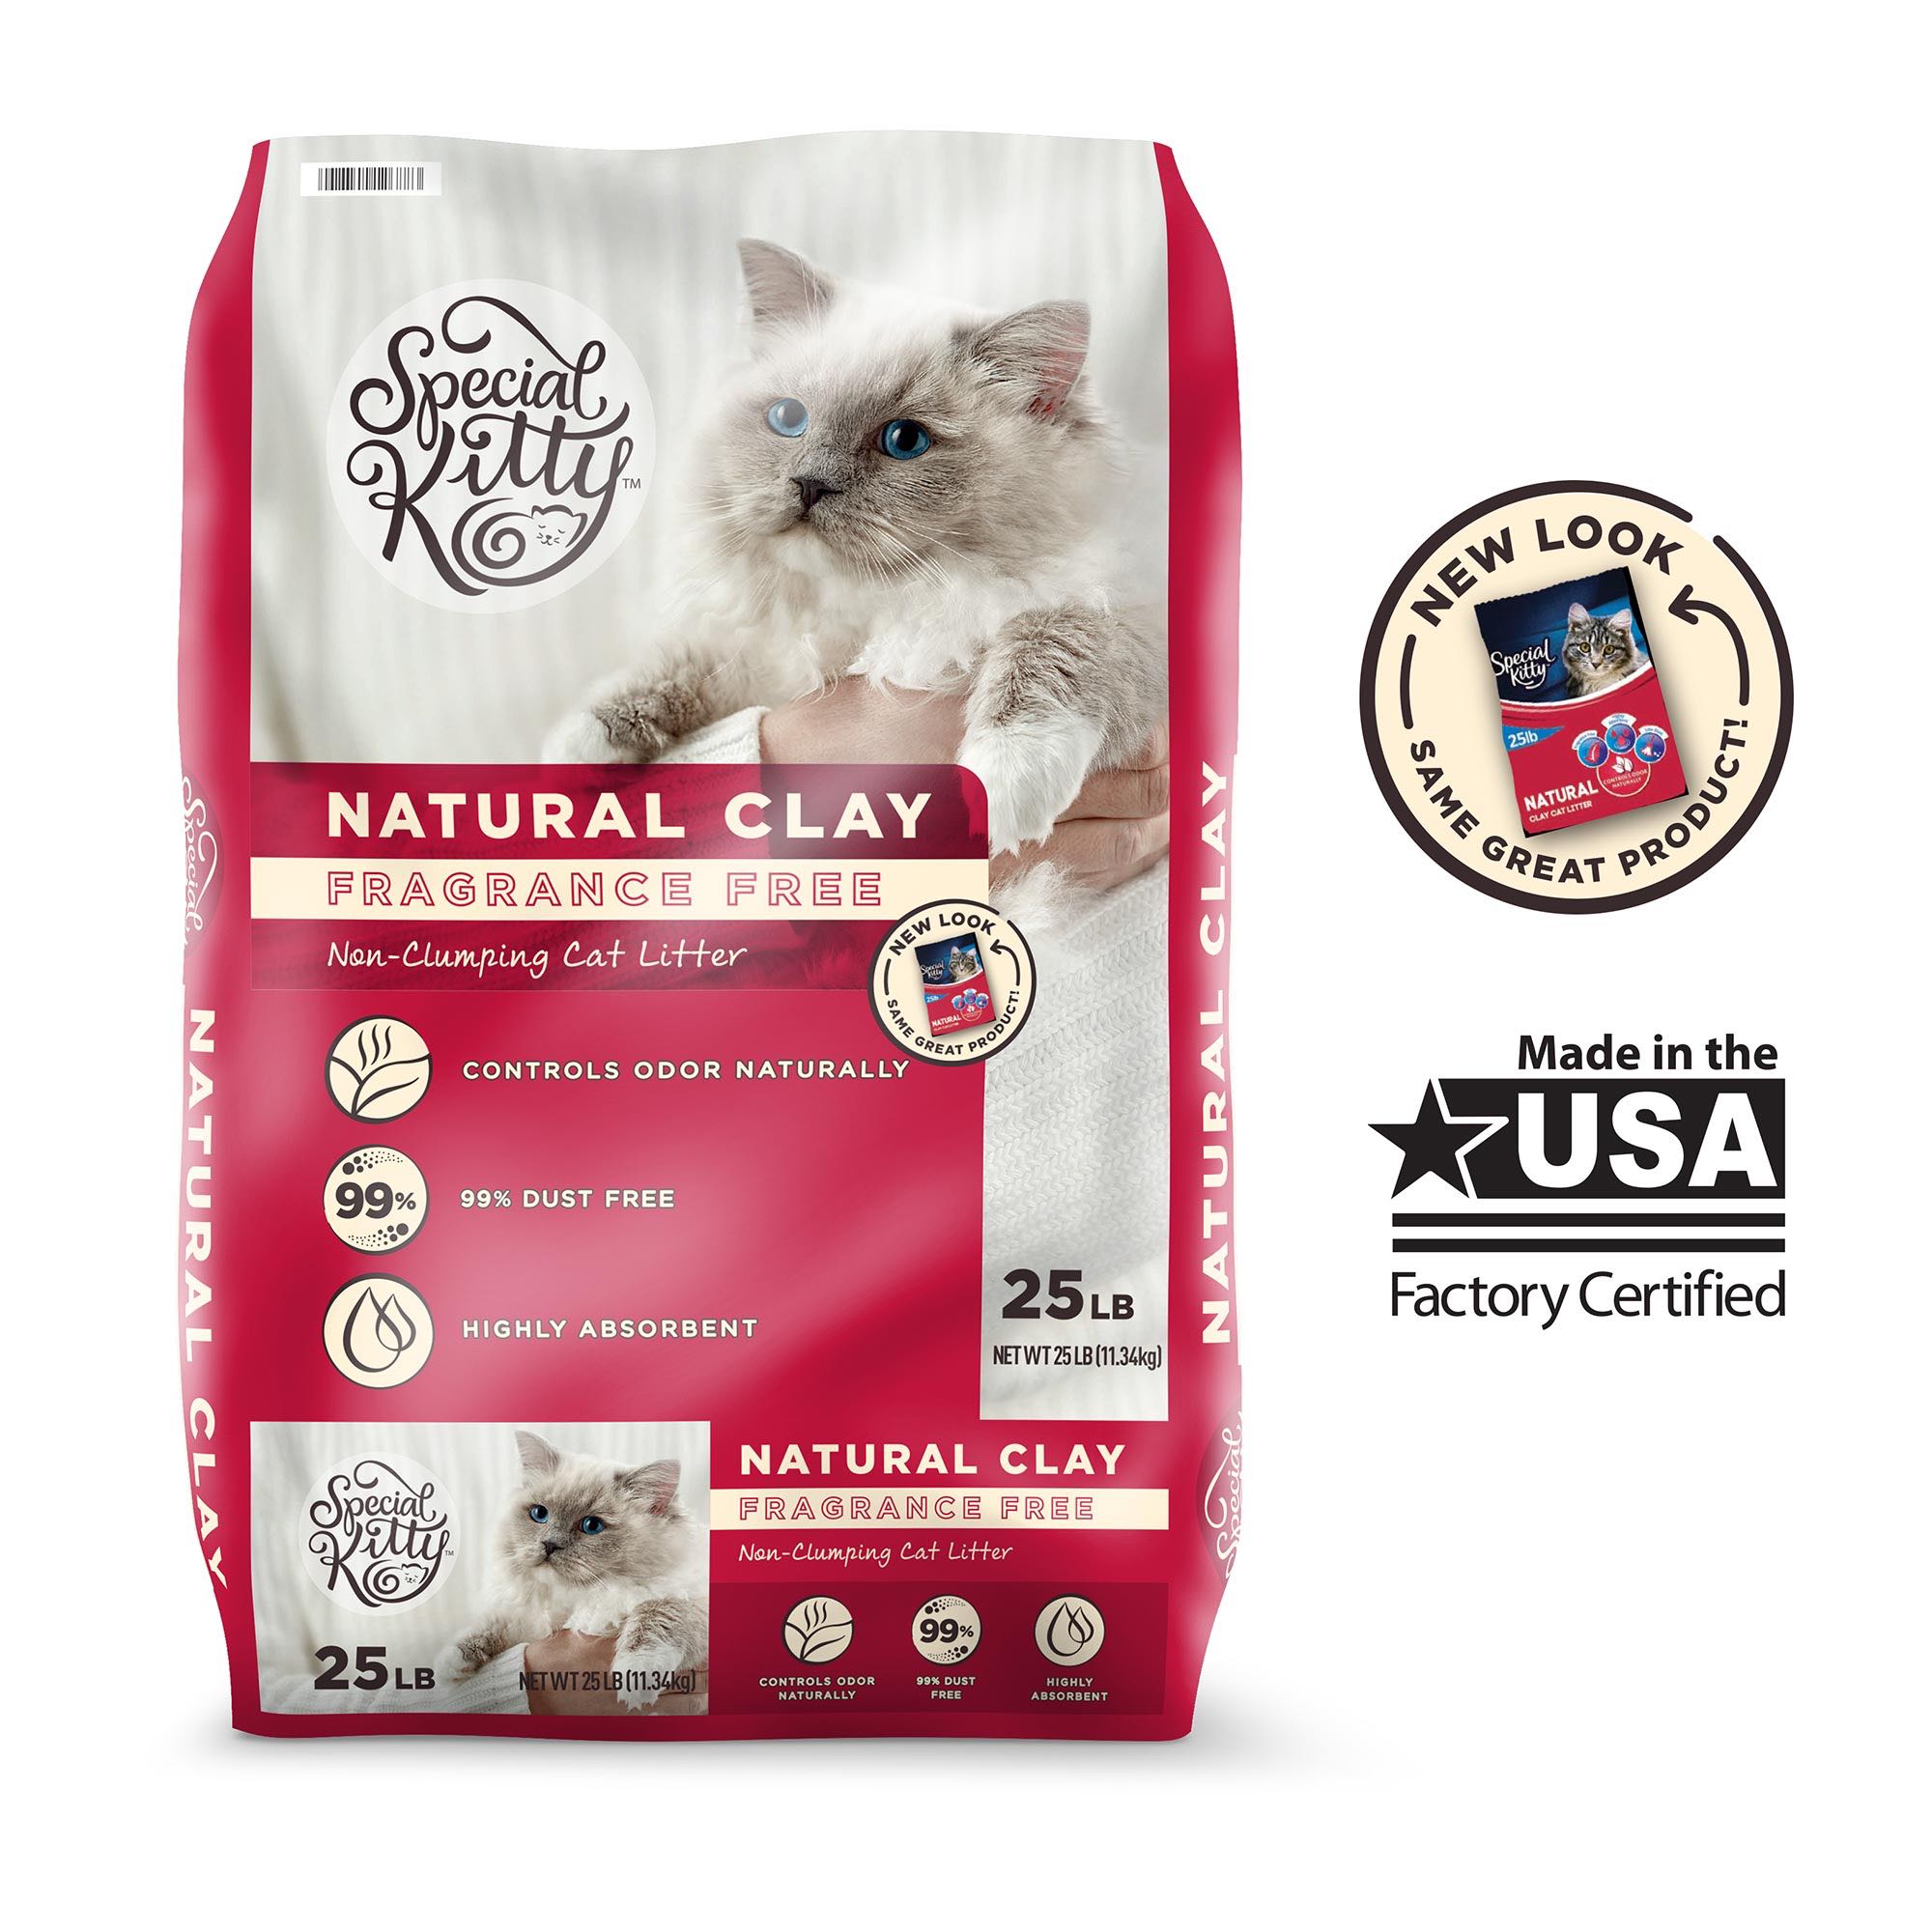 Special Kitty Fragrance Free Natural Clay Non-Clumping Cat Litter, 25 lb - image 3 of 10